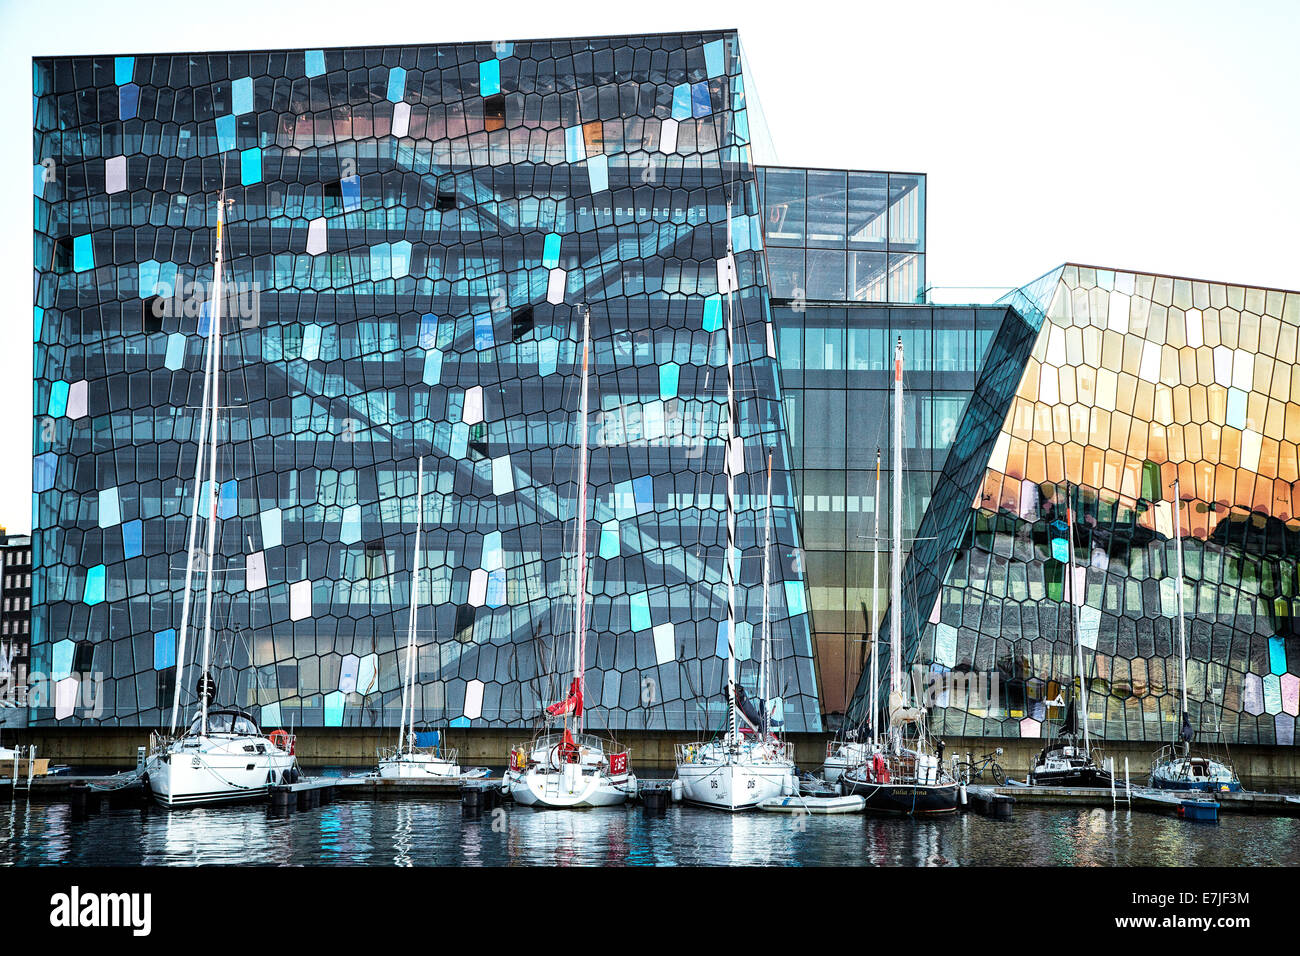 Architecture, attraction, facade, glass facade, harbour, port, harp, Harpa, capital, Iceland, Europe, conference center, concert Stock Photo